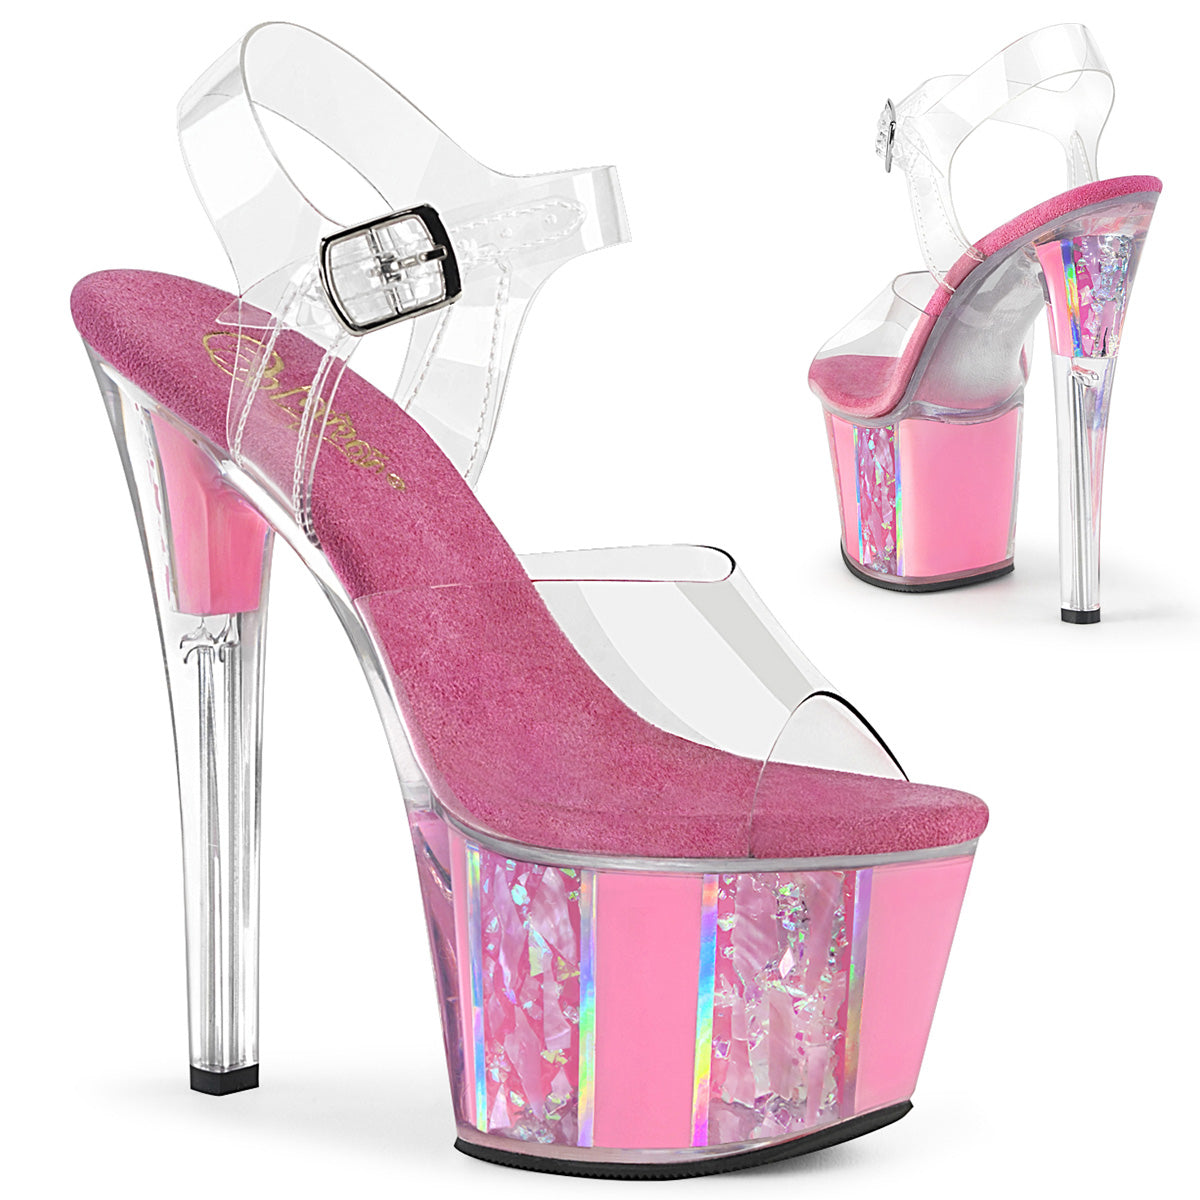 SKY-308OF 7" Heel Clear and Baby Pink Pole Dancer Platform Shoes